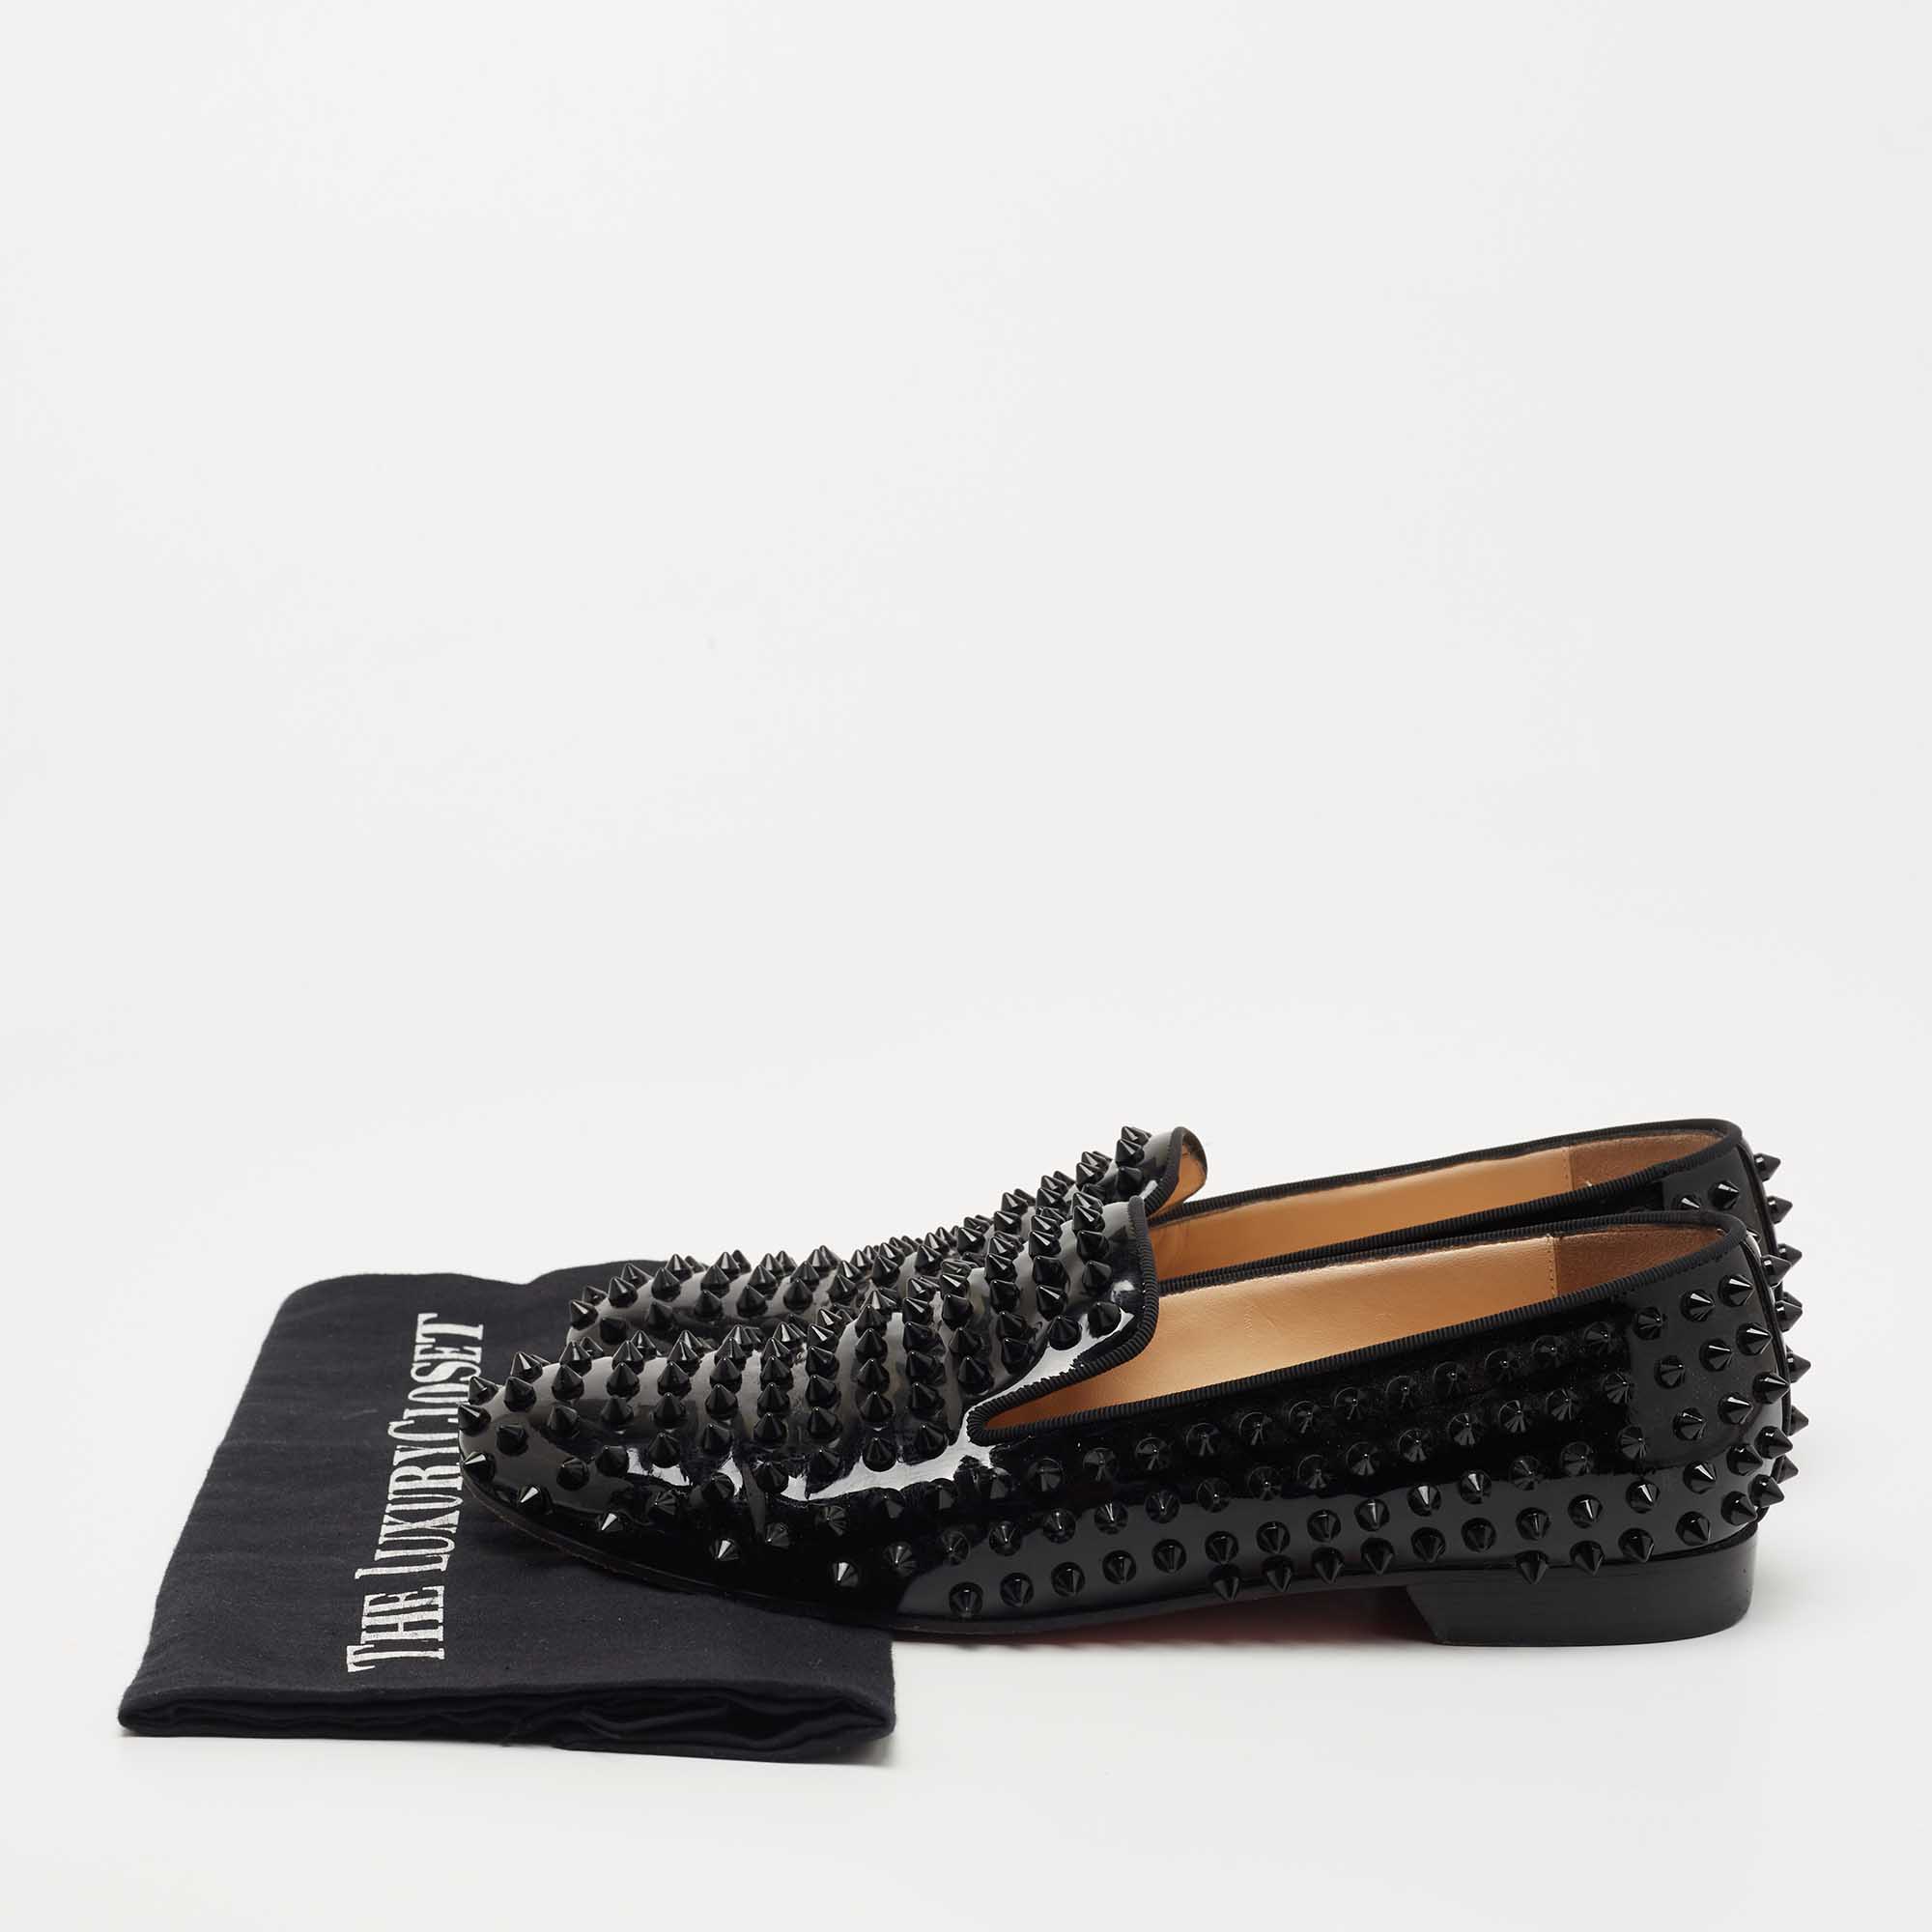 Christian Louboutin Black Patent Dandelion Spikes Loafers Size 39.5